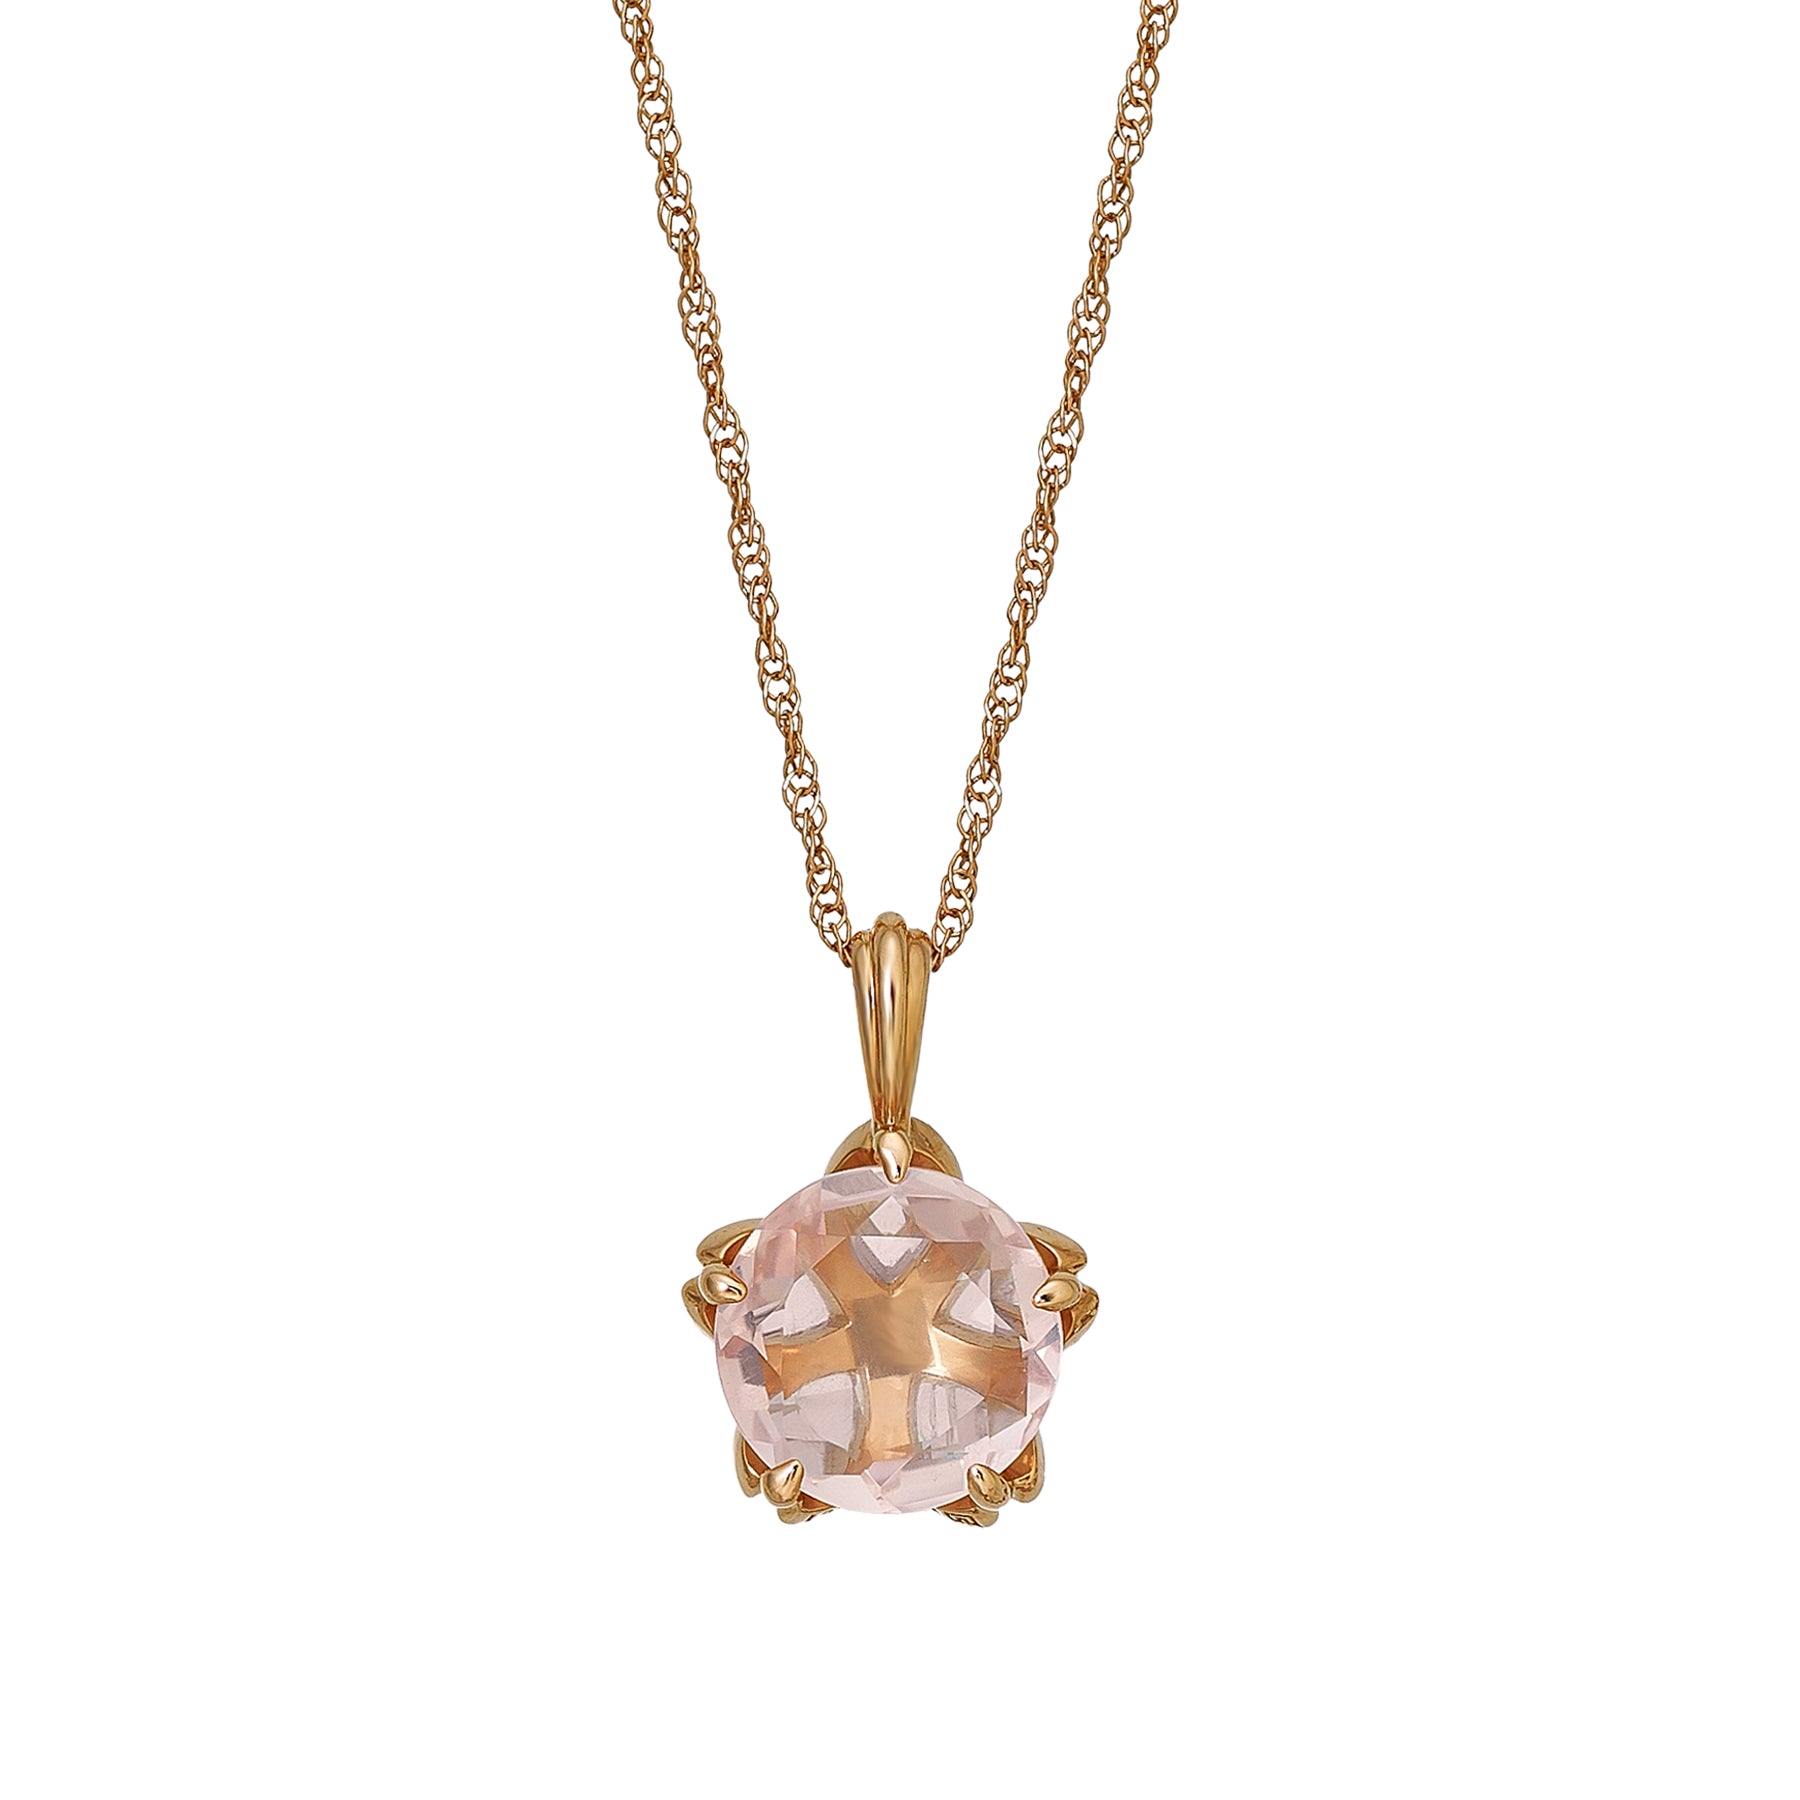 [Birth Flower Jewelry] April - Cherry Blossoms Reversible Necklace (10K Rose Gold) - Product Image